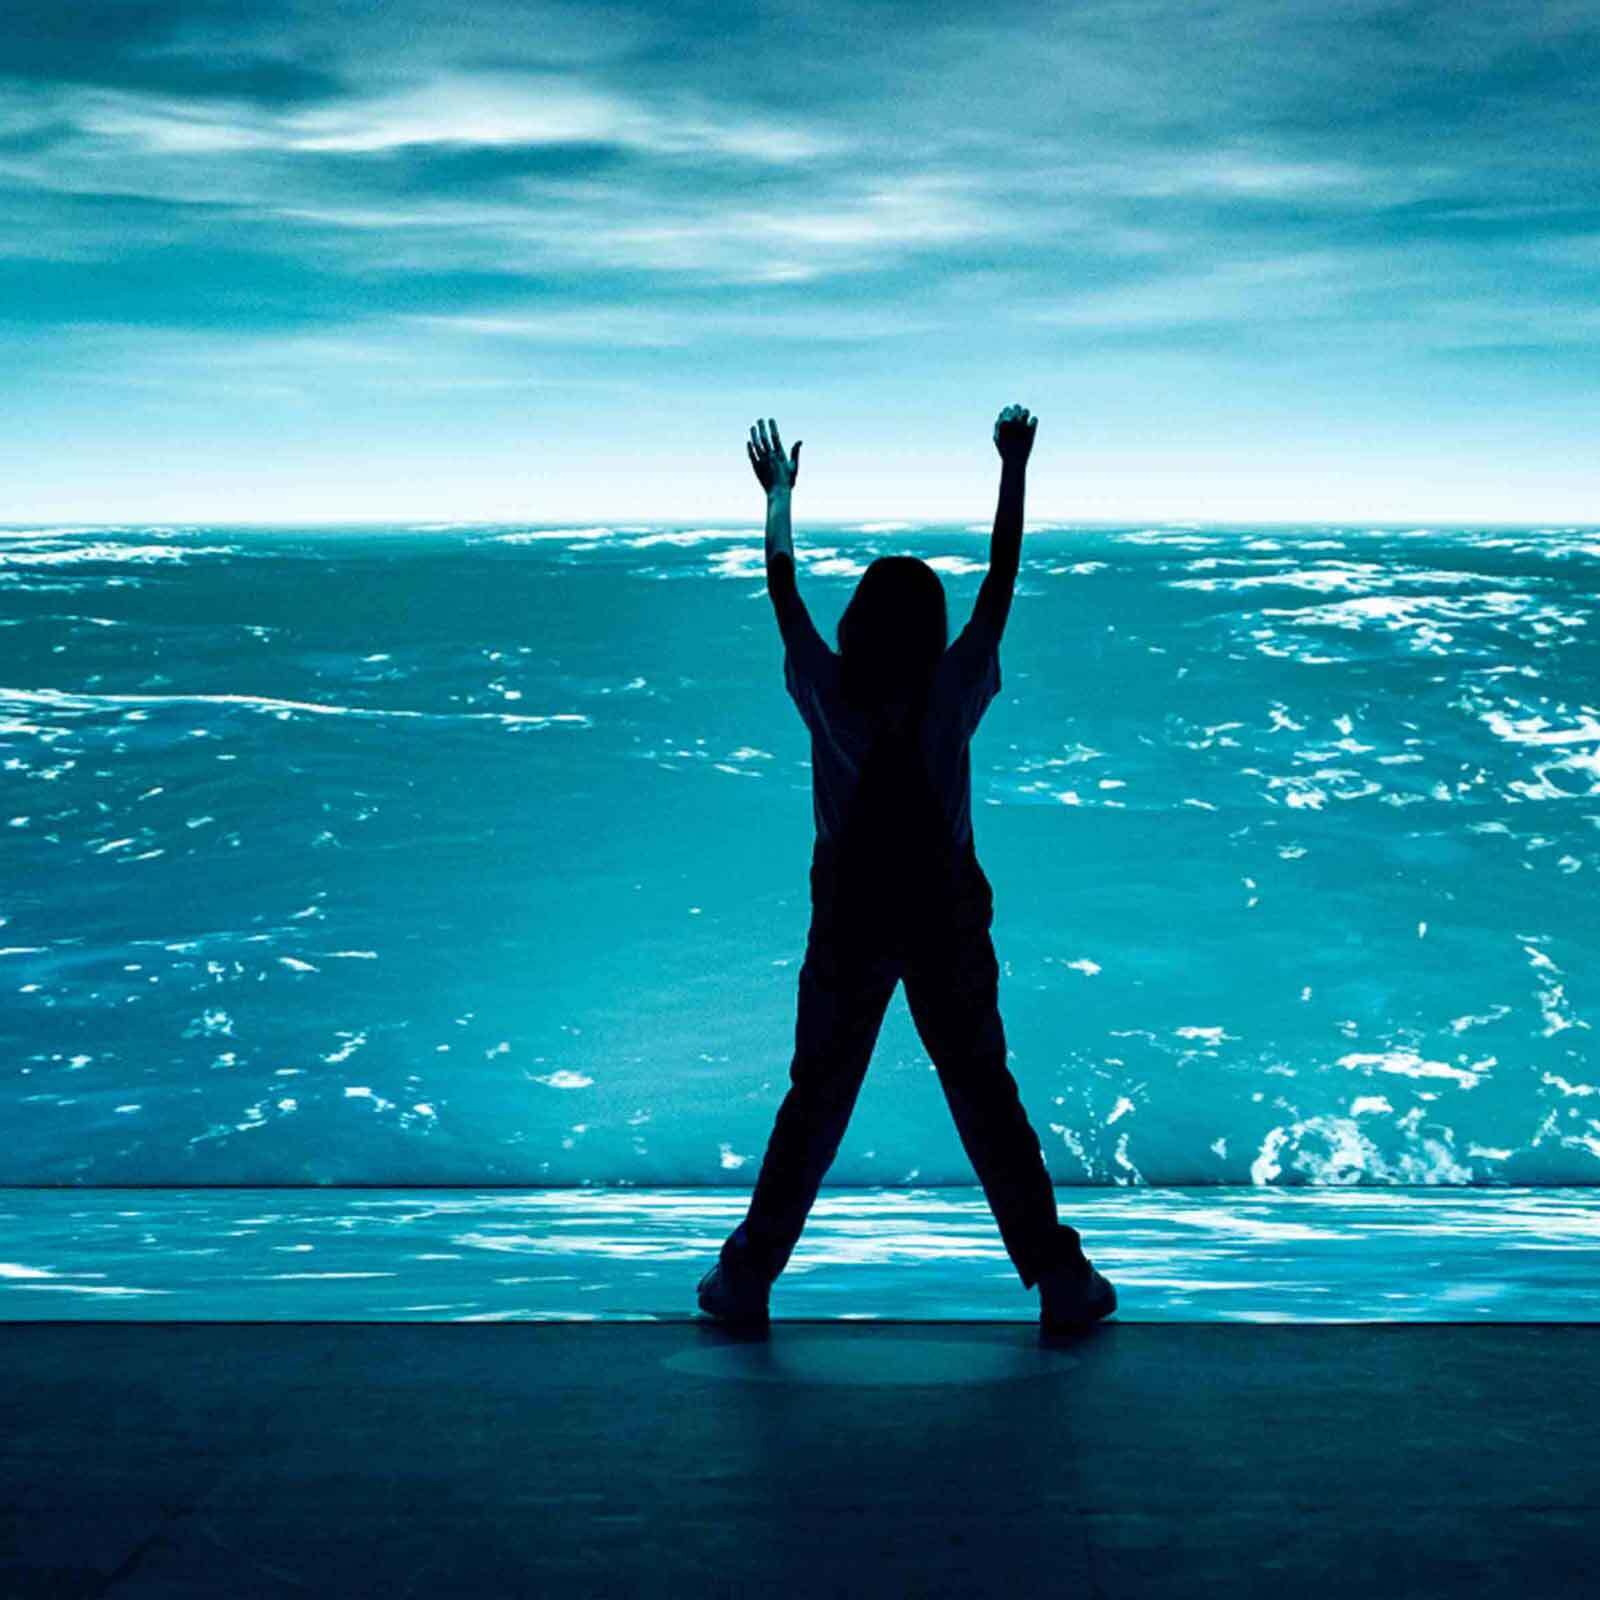 A person's silhouette is seen with hands up, set against a vivid blue, digitally crafted ocean background.